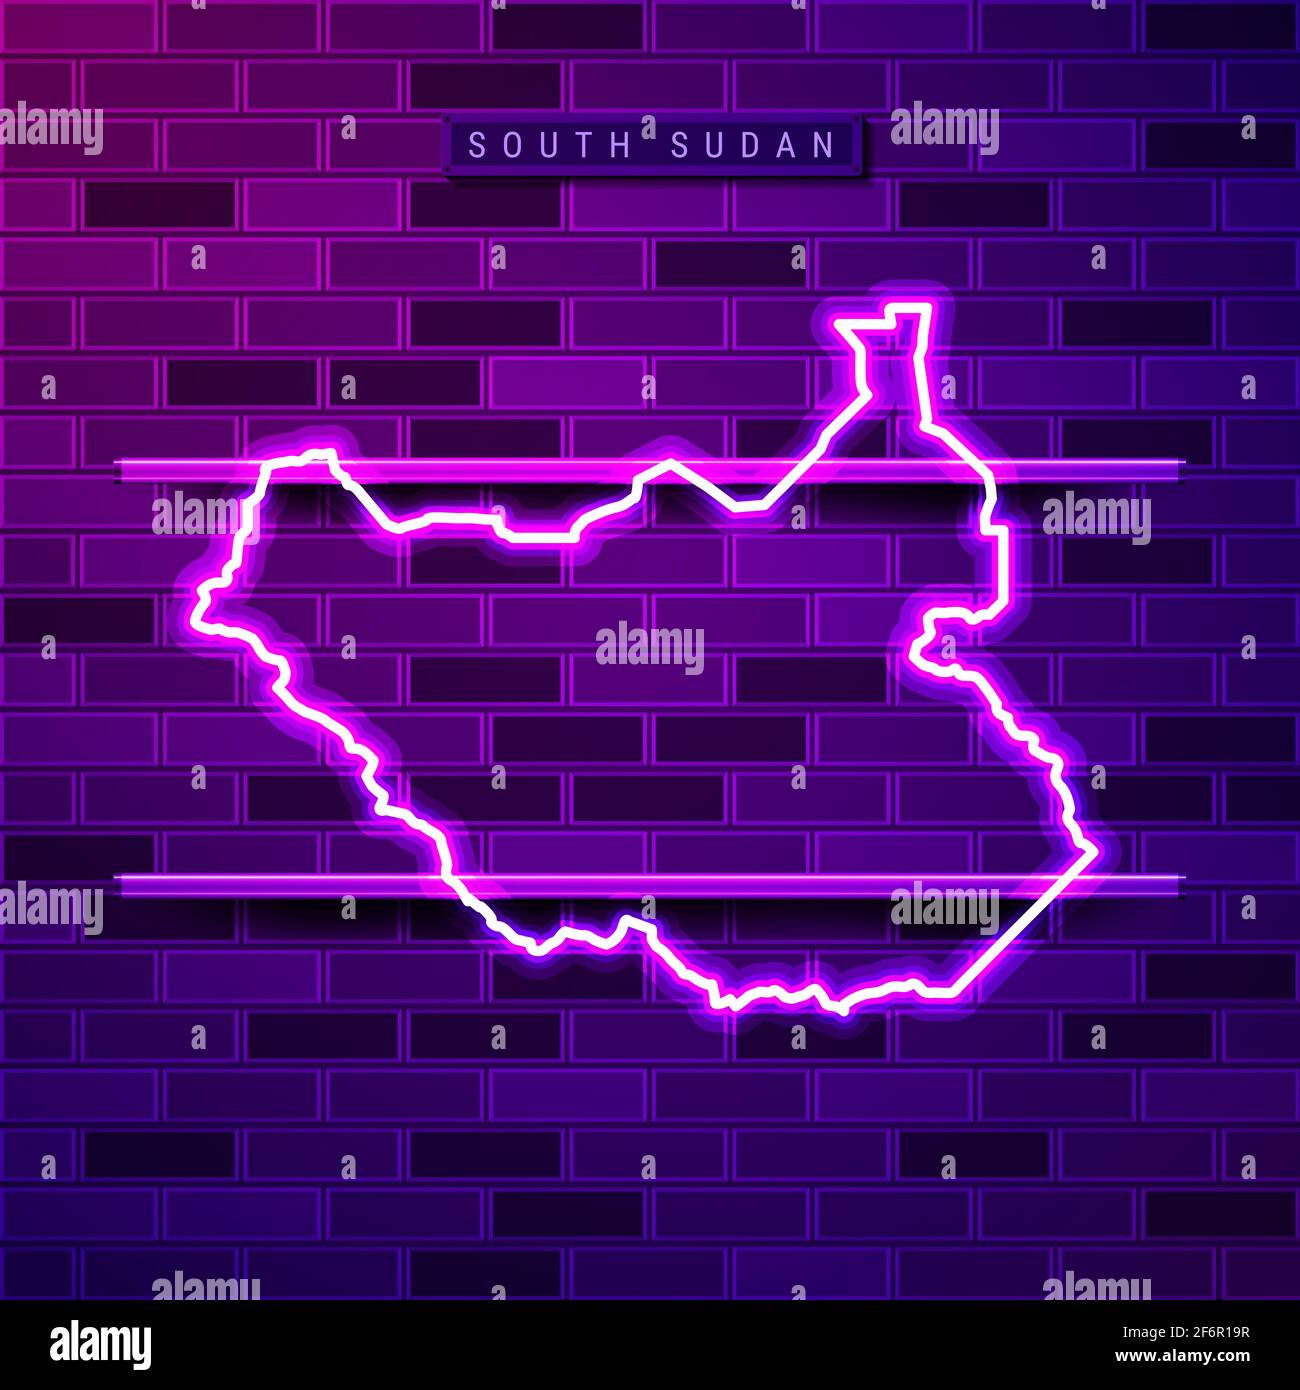 South Sudan map glowing neon lamp sign. Realistic illustration. Country name plate. Purple brick wall, violet glow, metal holders. Stock Photo